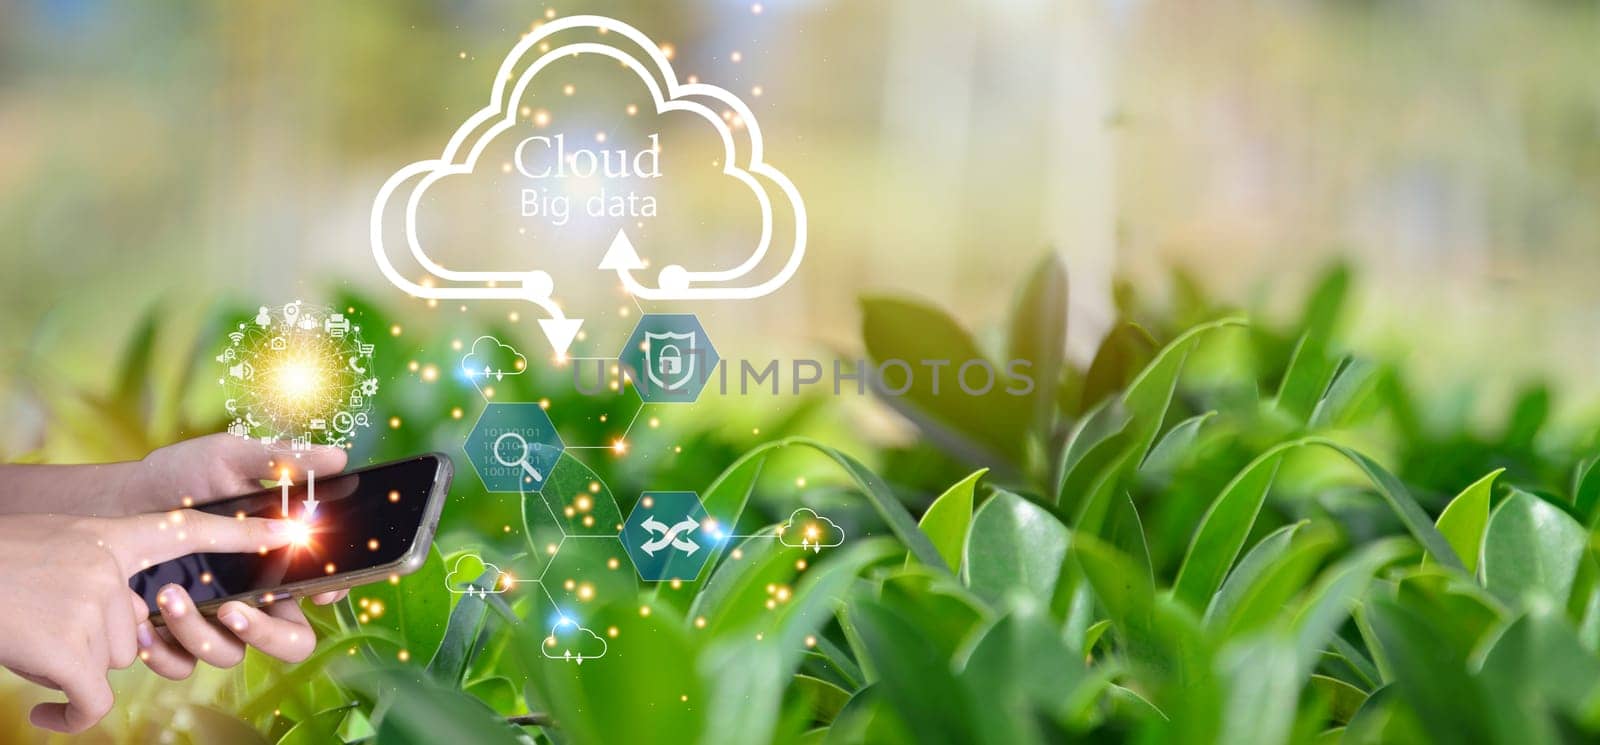 The idea of using the online cloud is convenient. Energy-saving and economical, low cost and safe for users.